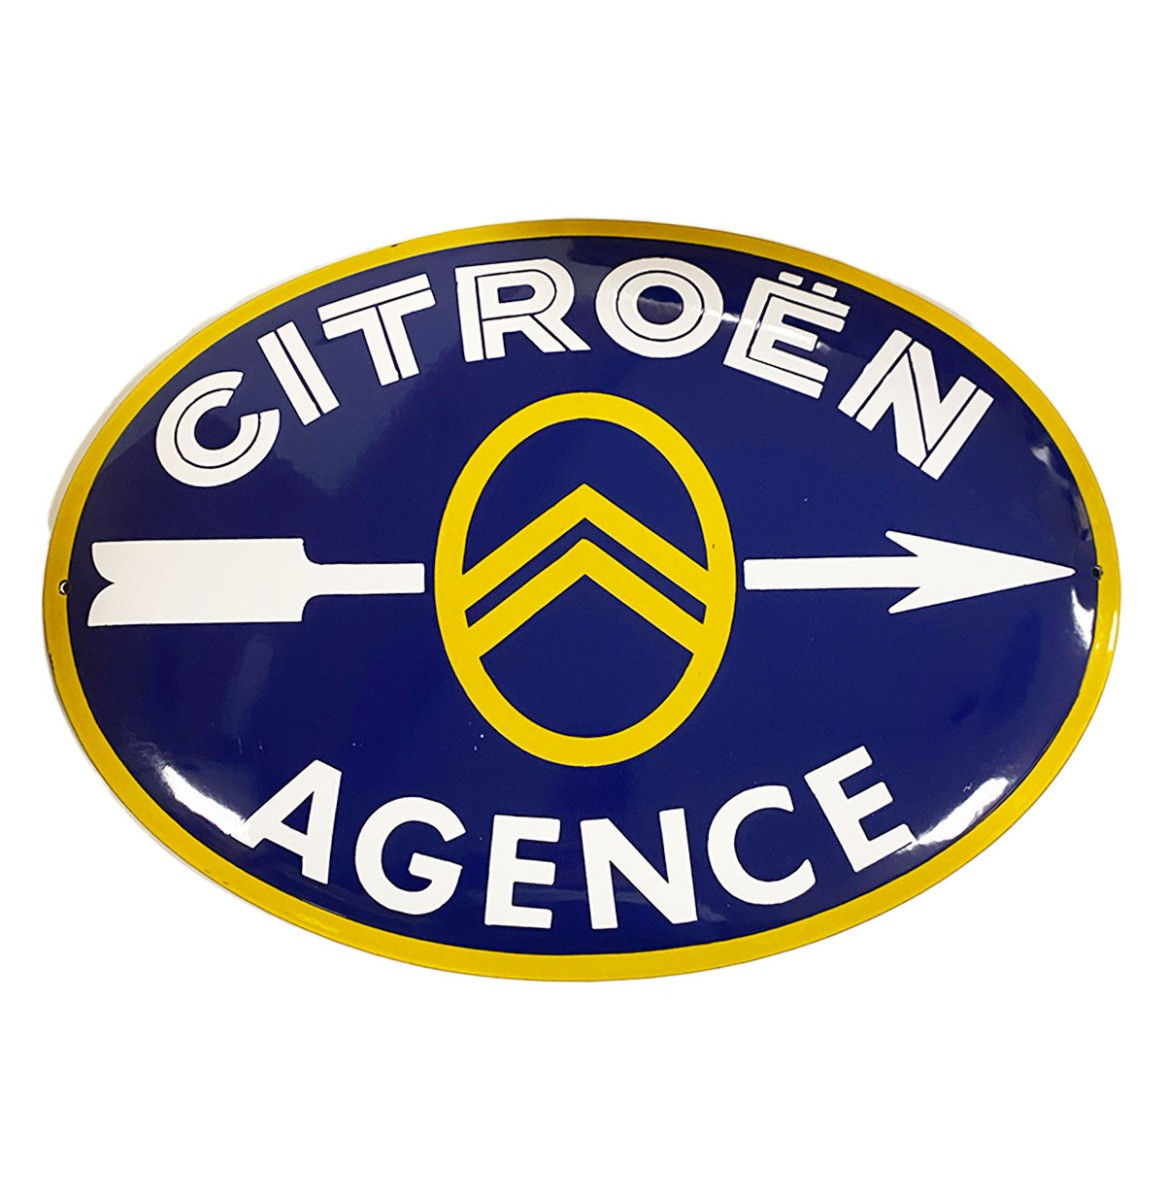 Citroen Agence Emaille Bord - 55 x 40cm